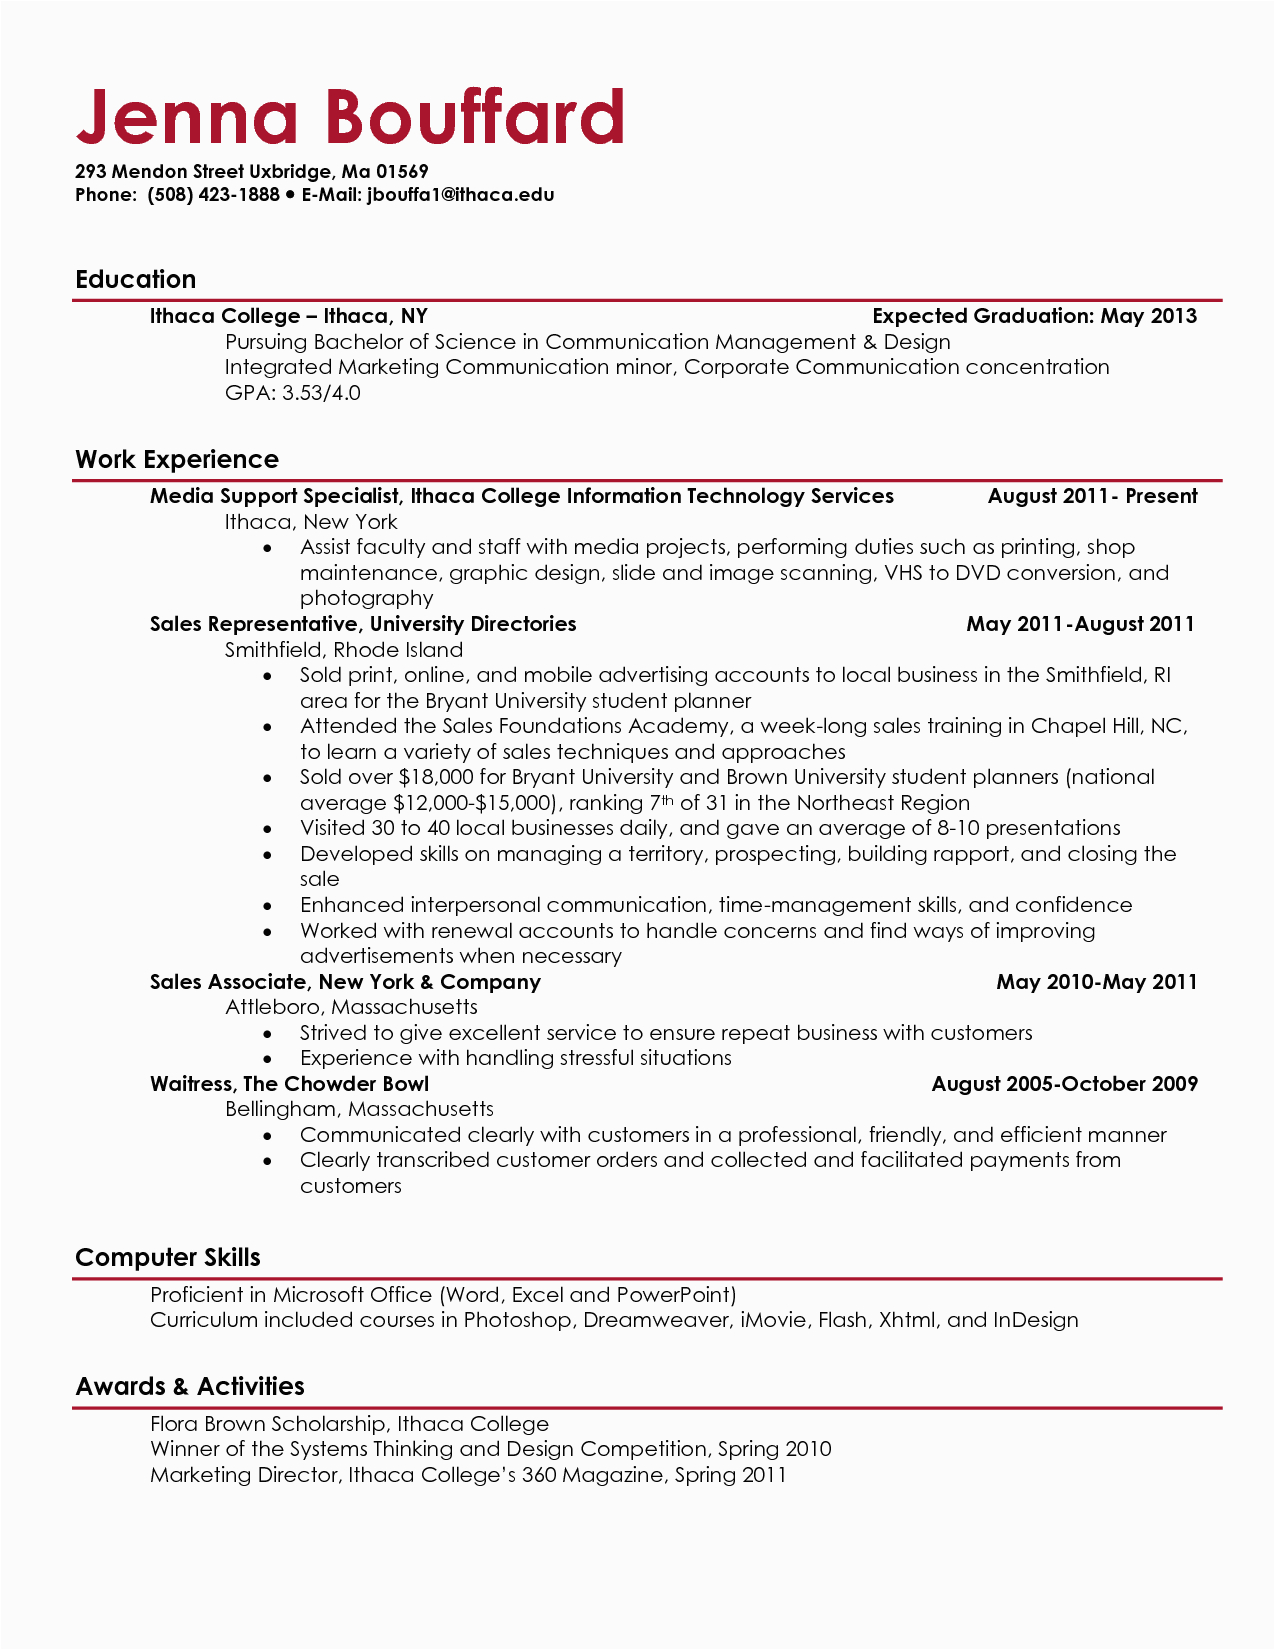 Resume Templates for College Students Free Current College Student Resume – Planner Template Free